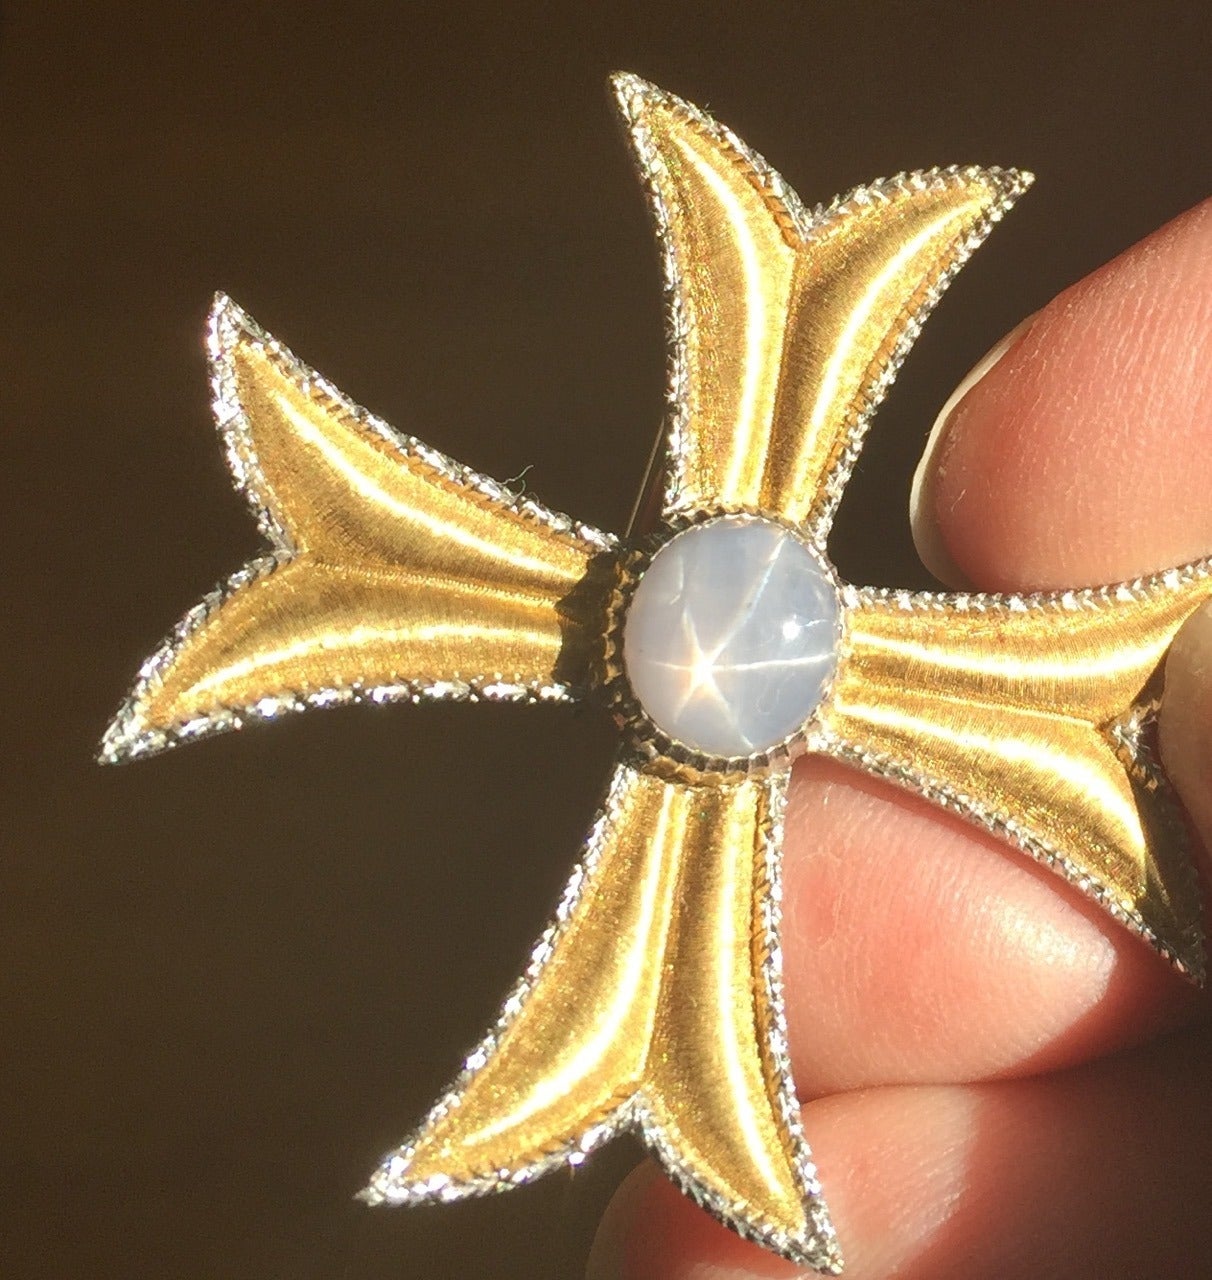 Buccellati Maltese Cross 18K Yellow Gold Brooch With Star Saphire. Very rare.

A brooch of exceptional elegance with a Florentine finish, trimmed in 18K white gold. The center has a natural gray 5 pointed star sapphire, weighing approximately 4.50